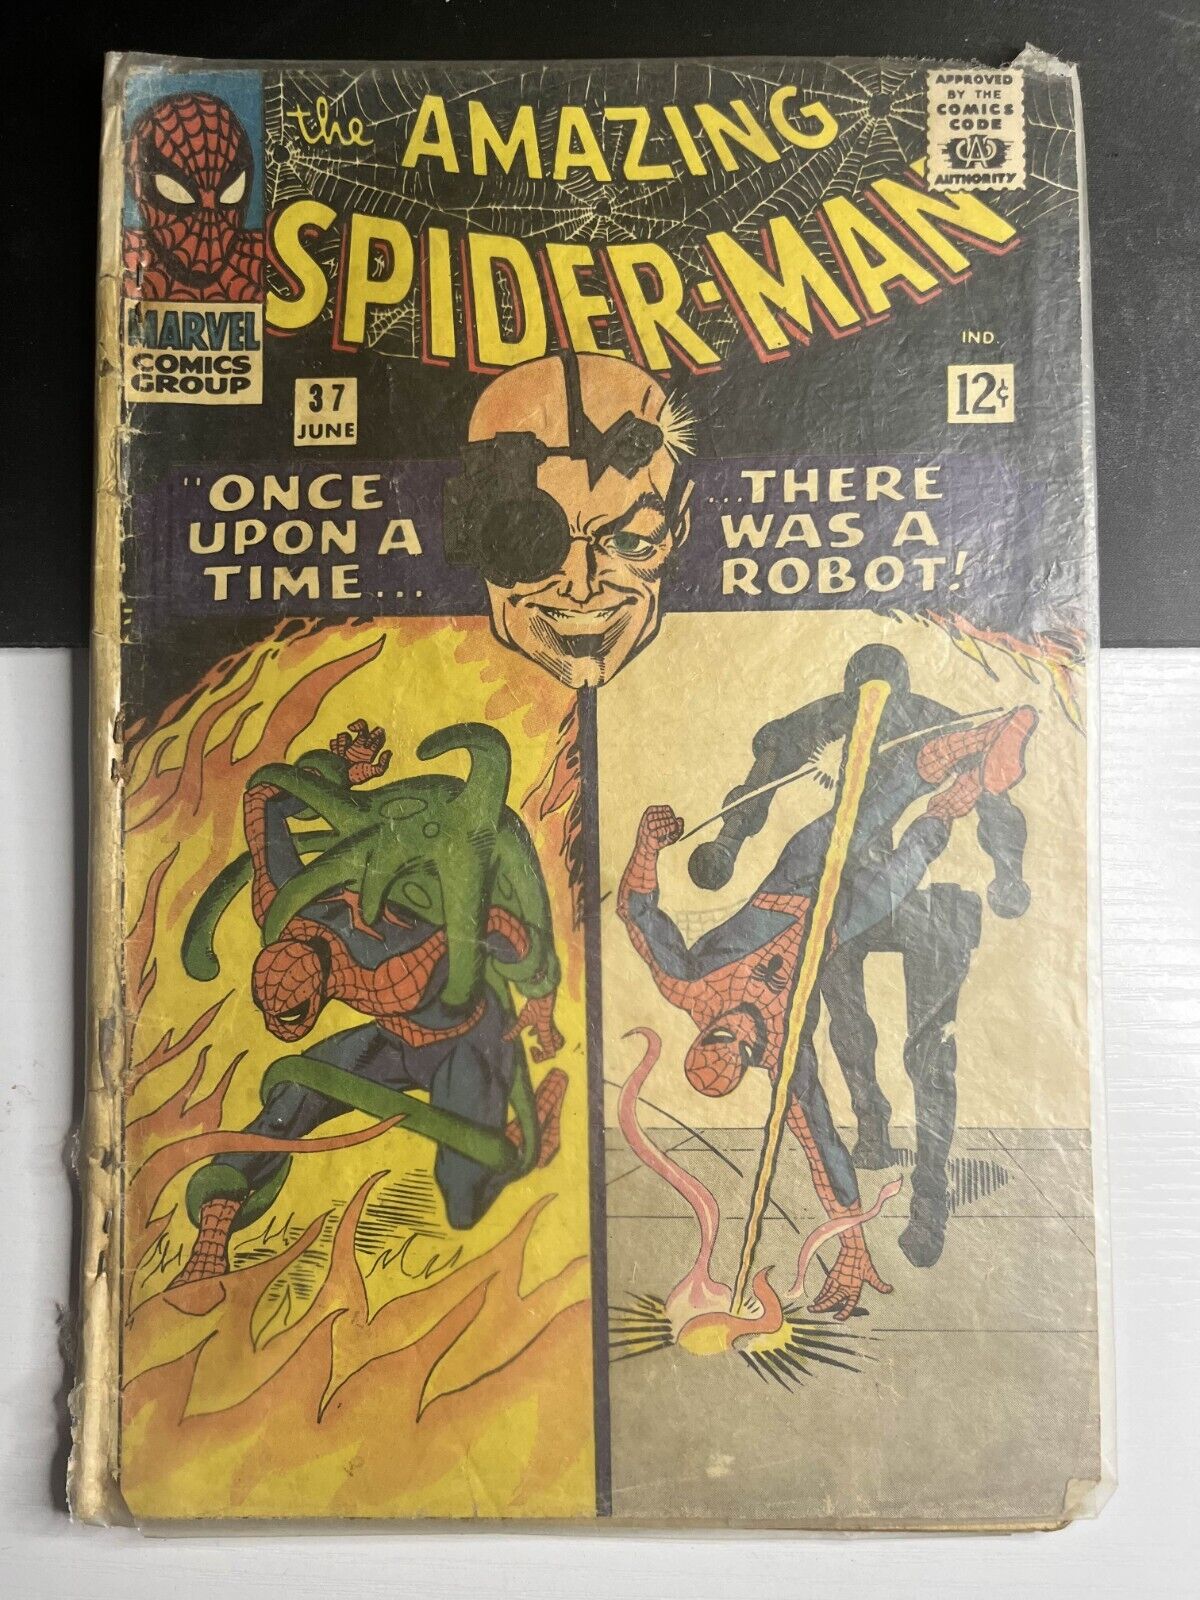 The Amazing Spider-Man #37 - Green Goblin 1st Appearance As Norman Osborn